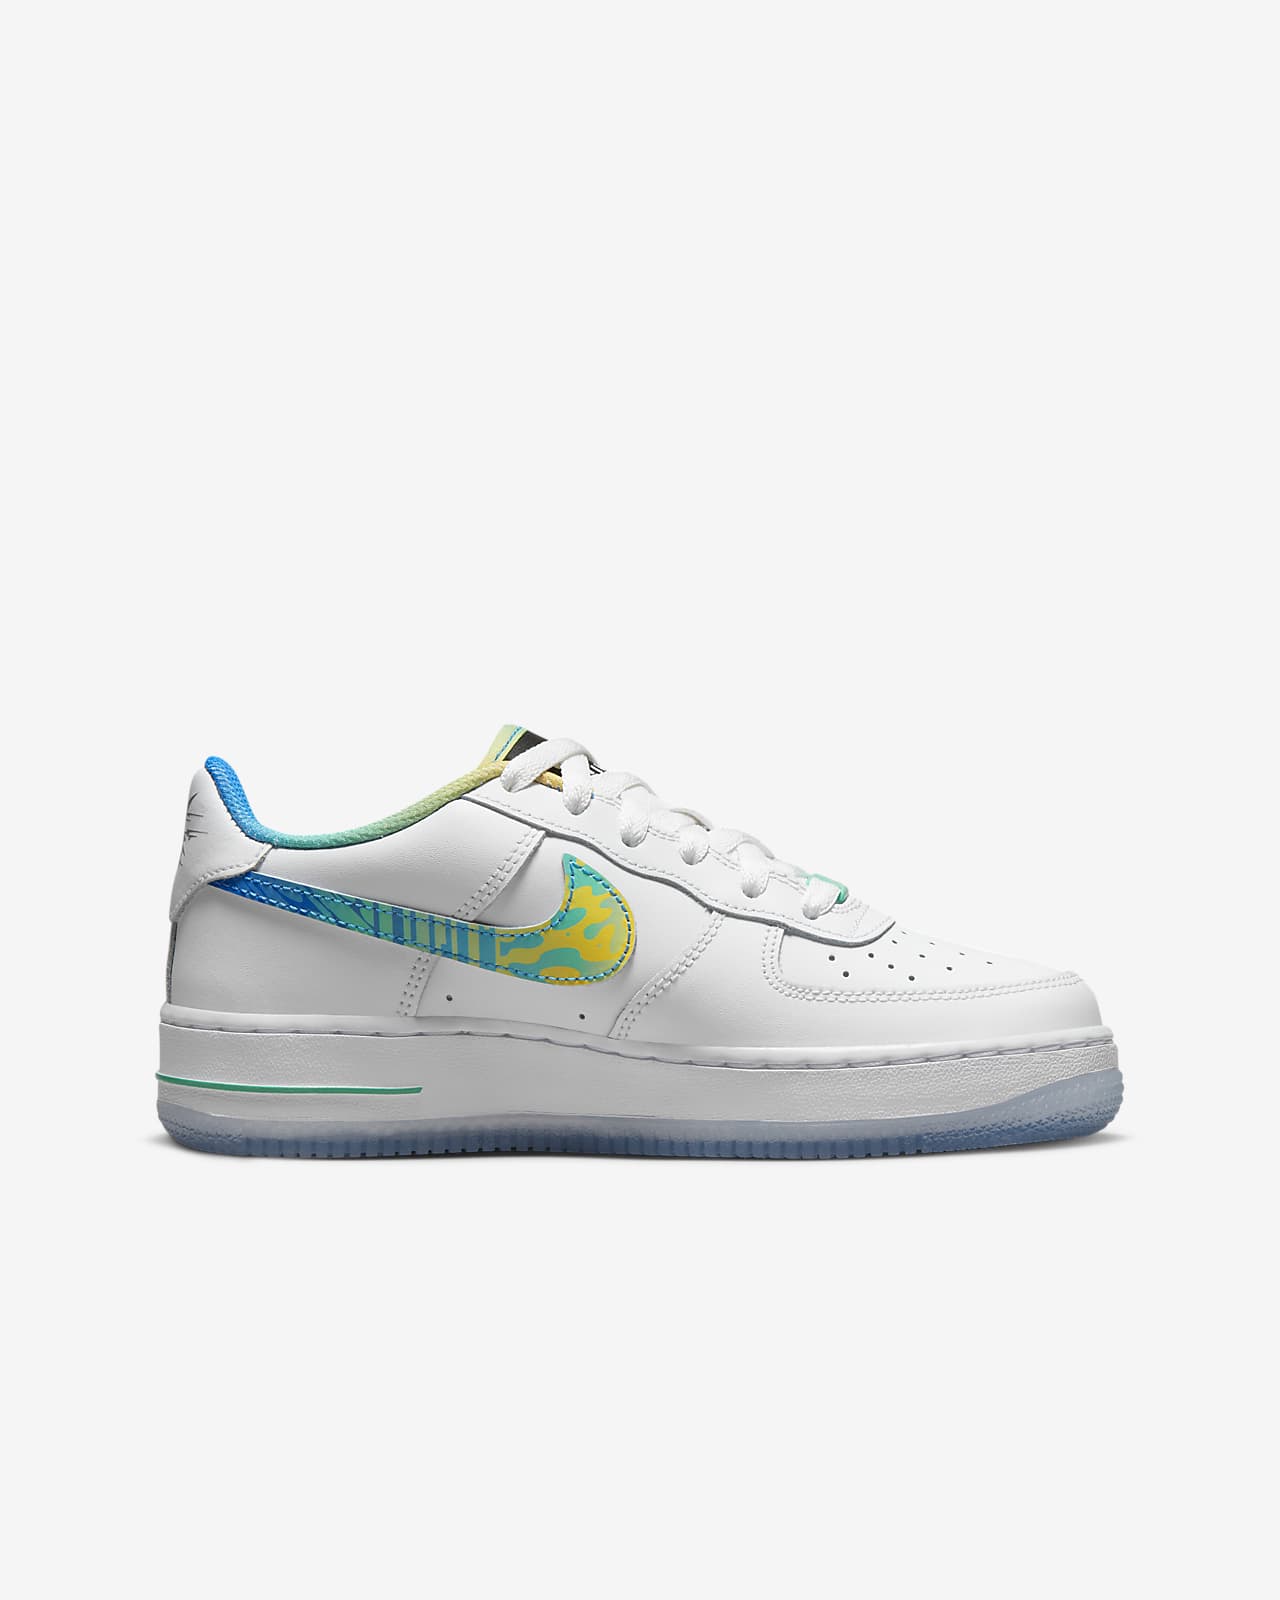 Air Force 1 LV 8 Leather Sneakers in White - Nike Kids